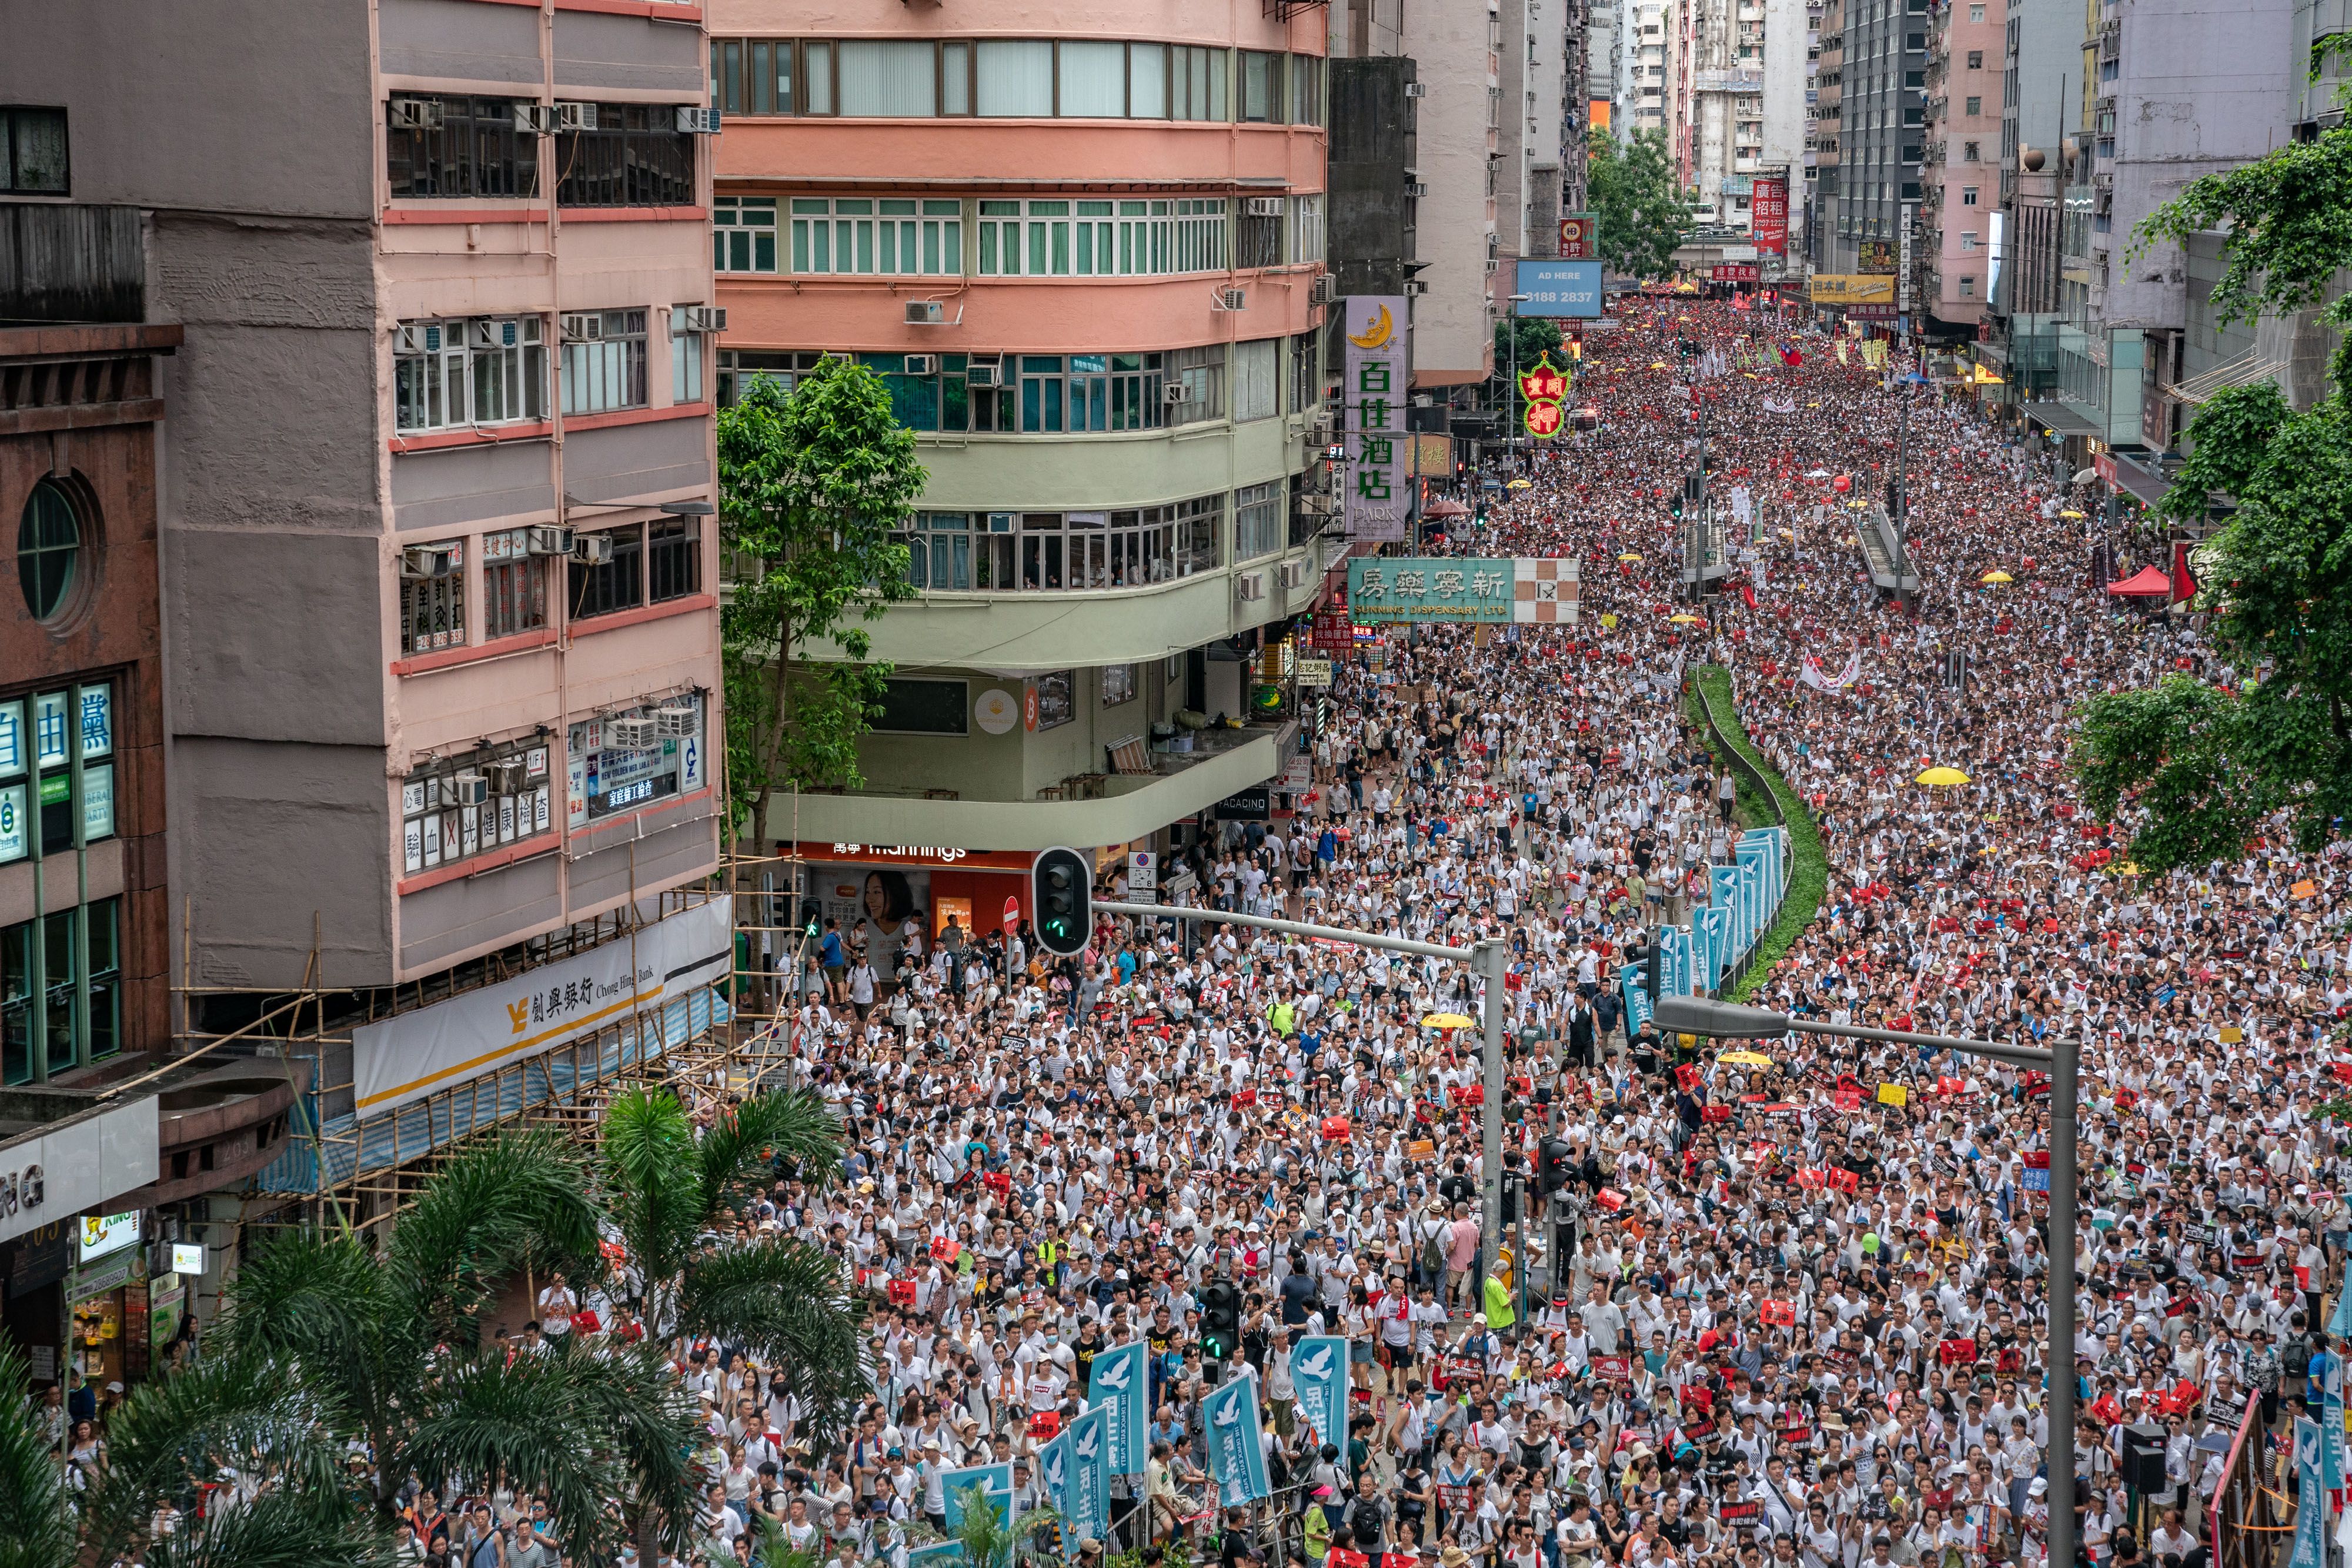 Protesters march on a street during a rally against a controversial extradition law proposal